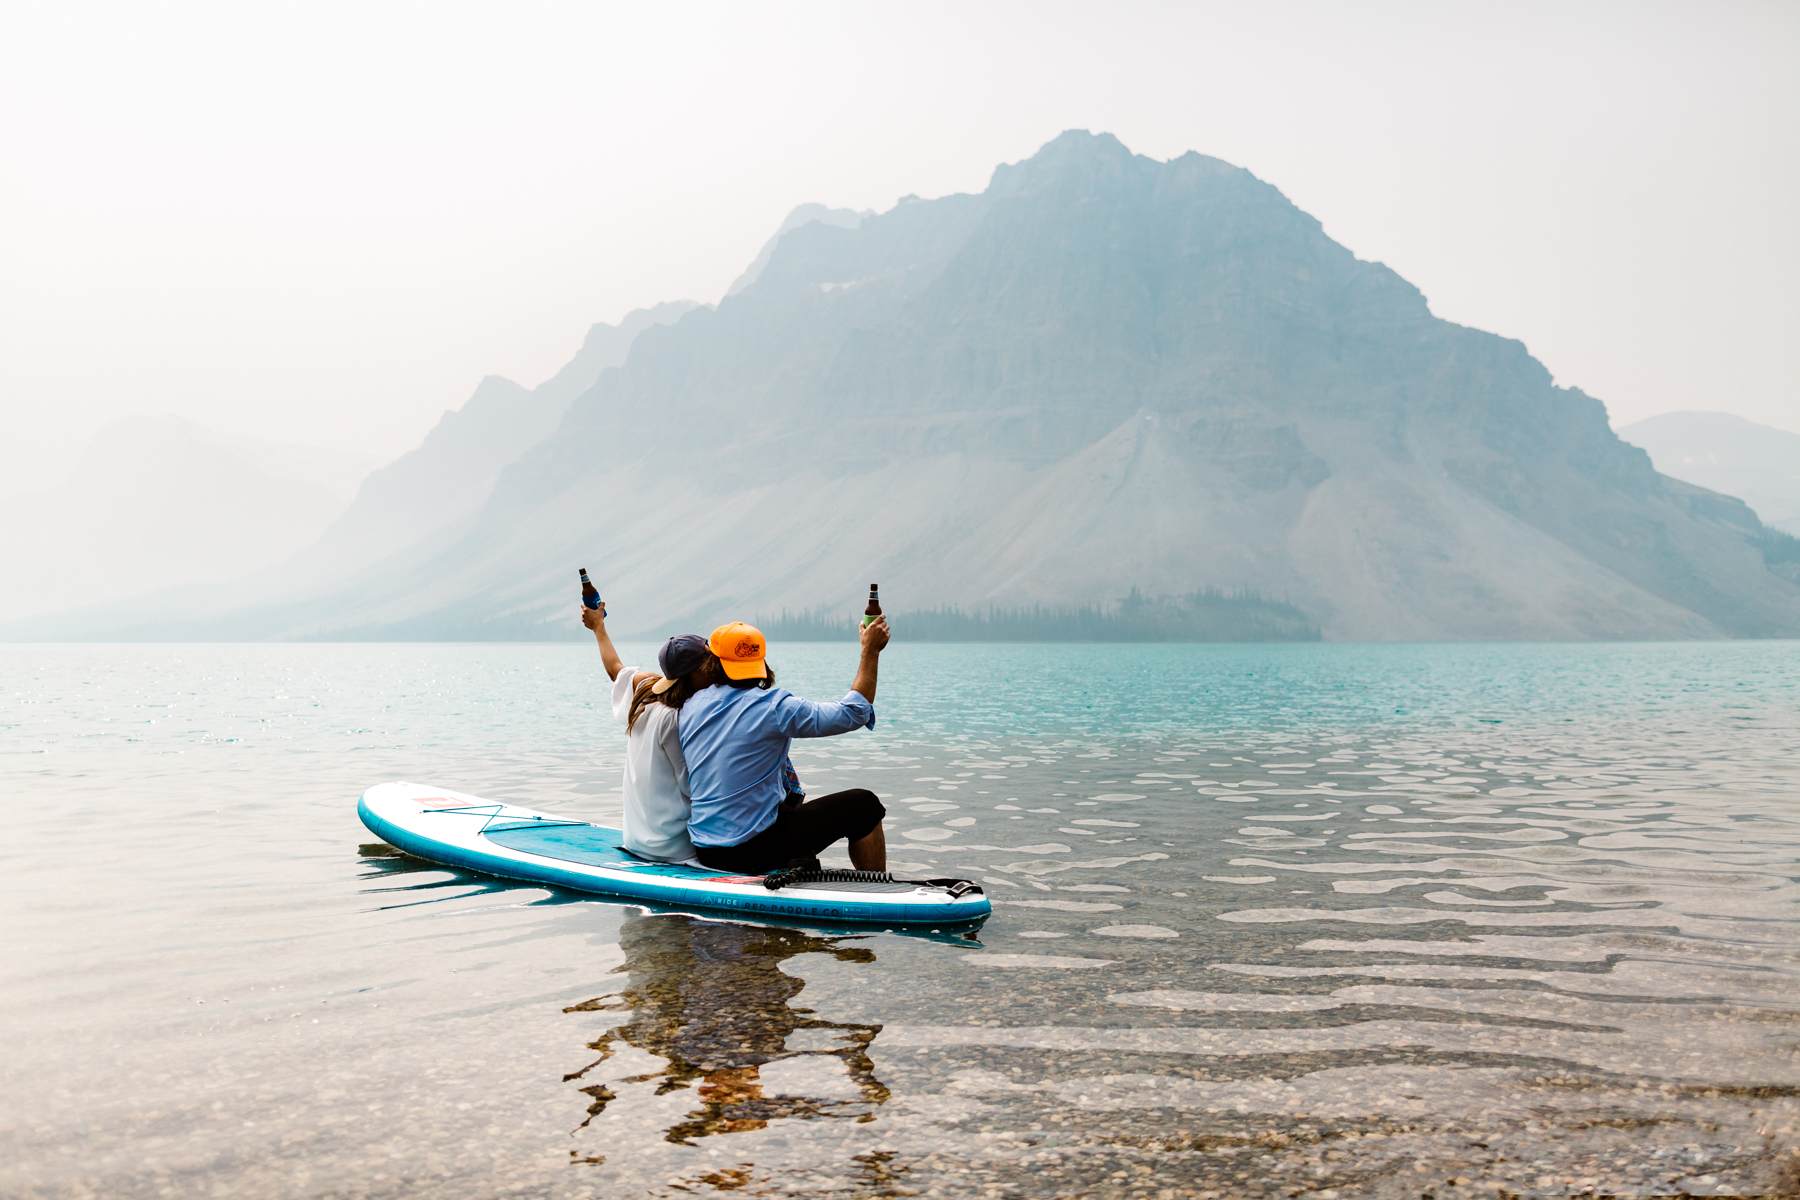 Adventure Elopement Photographers in Banff National Park at Moraine and SUP on Bow Lake